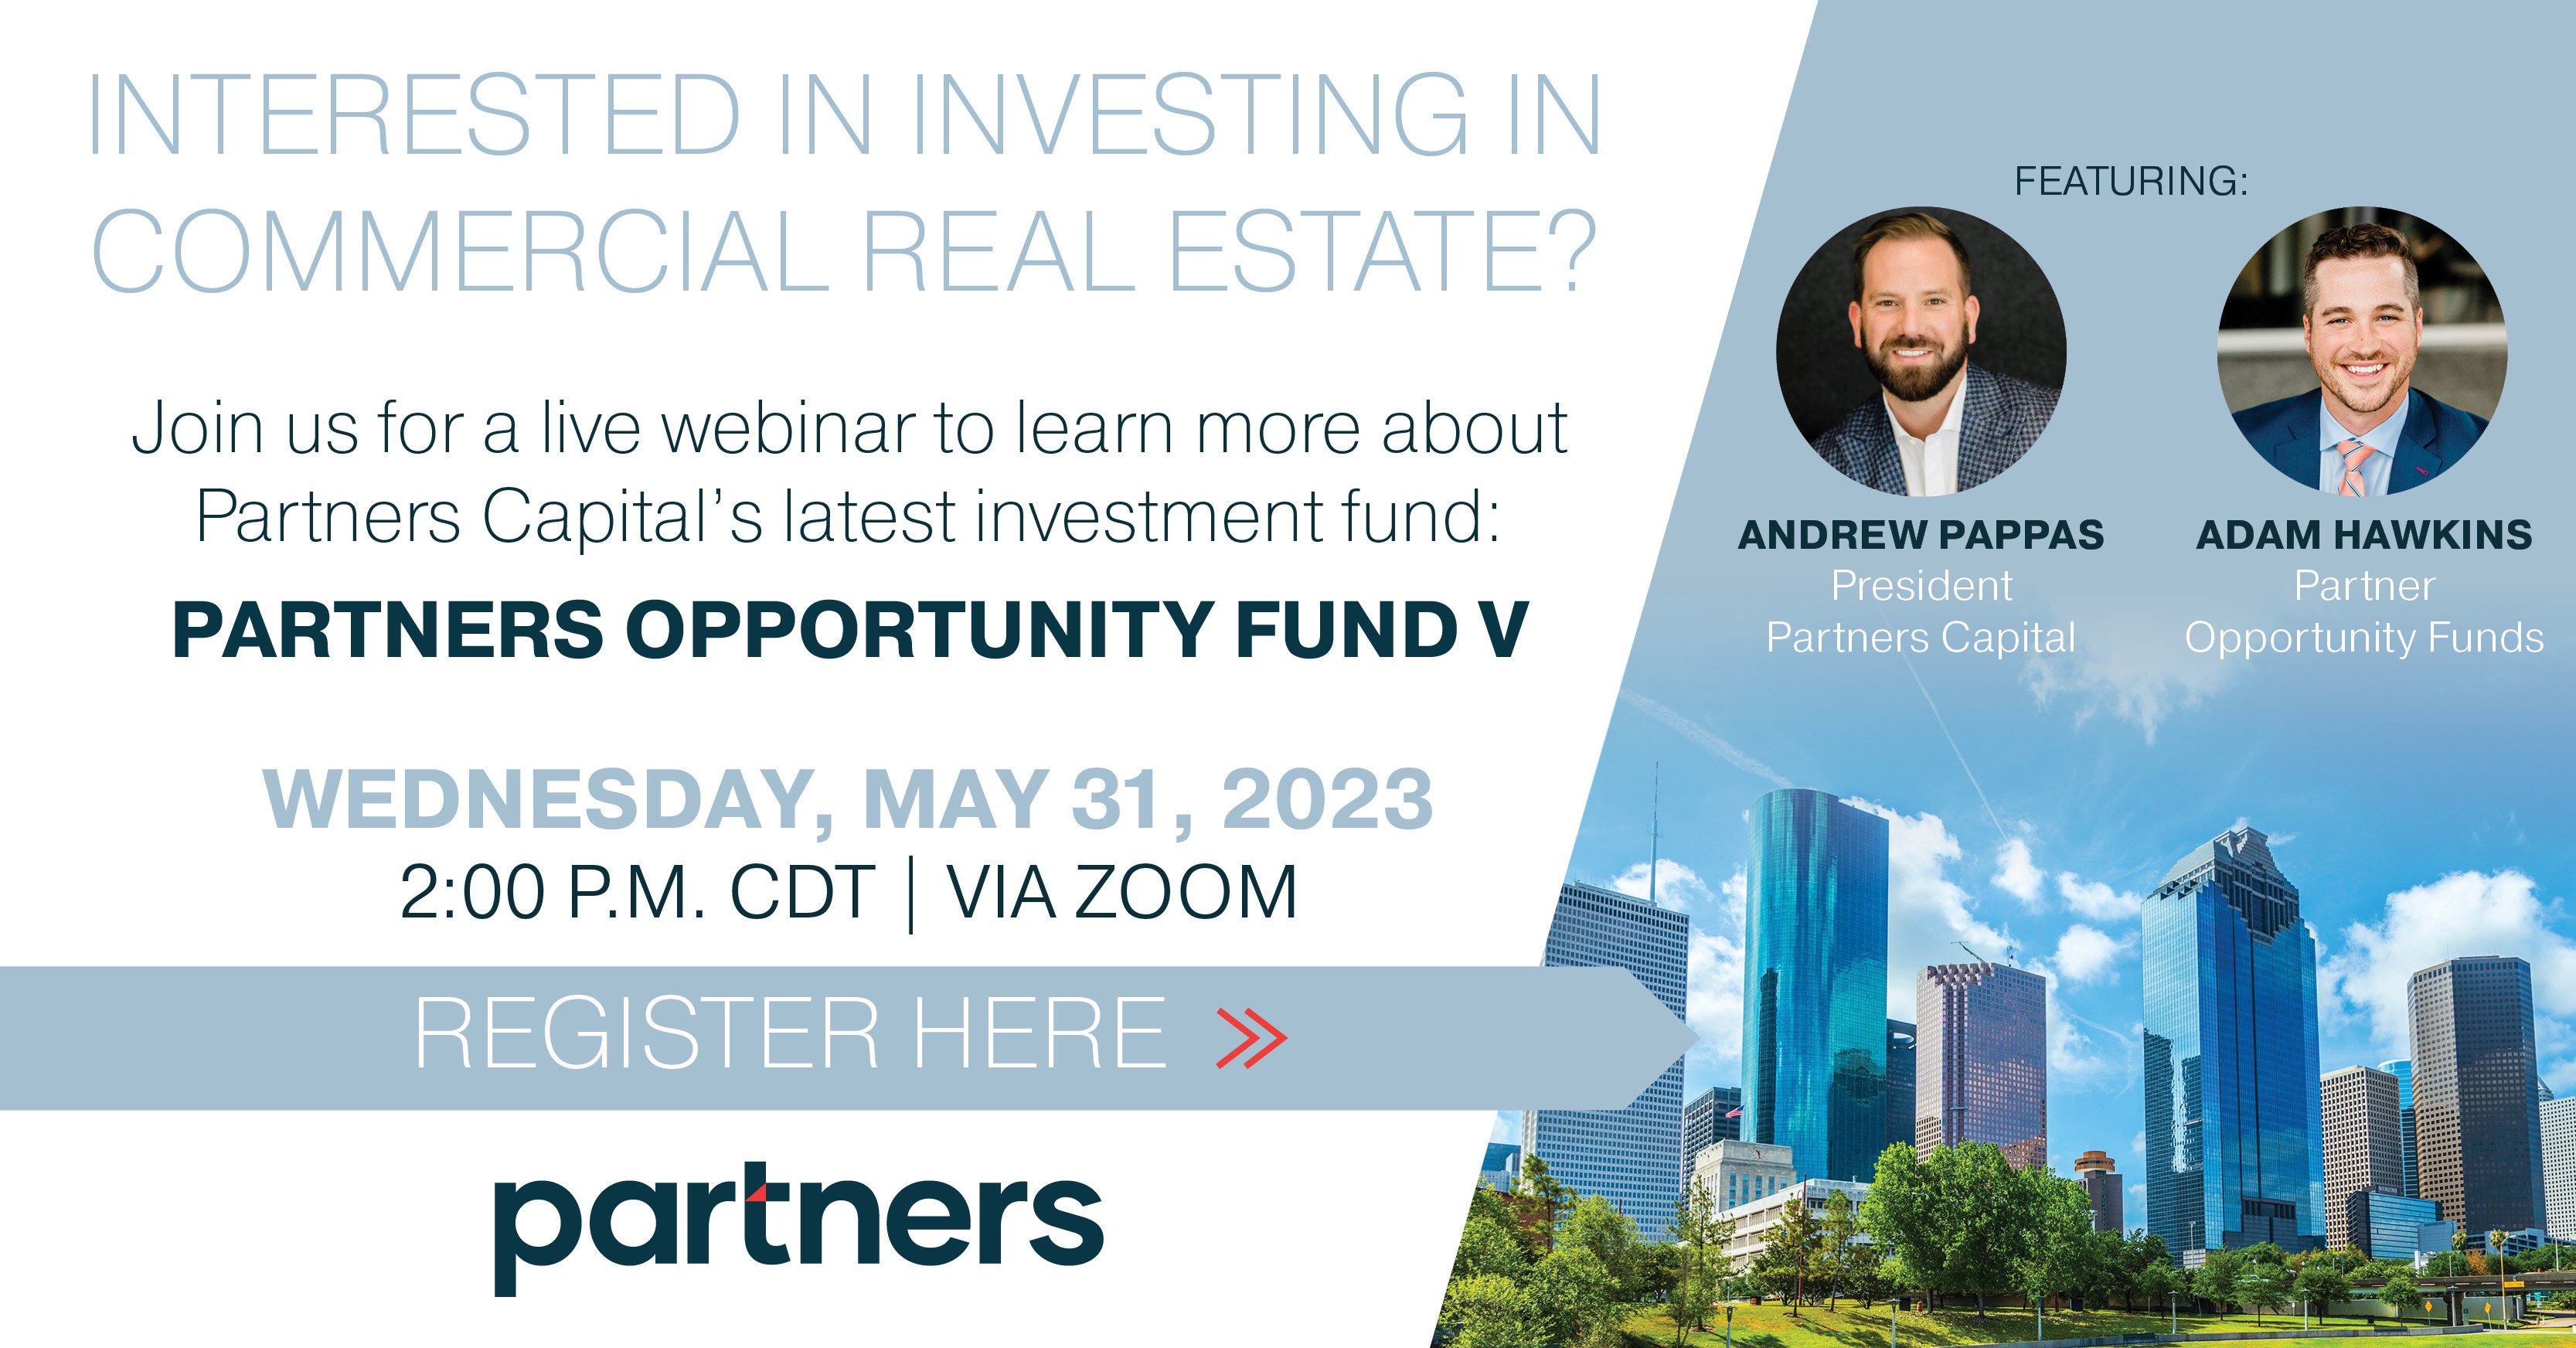 Join Partners Real Estate's Andrew Pappas for a Webinar event to learn about Opportunity Fund V